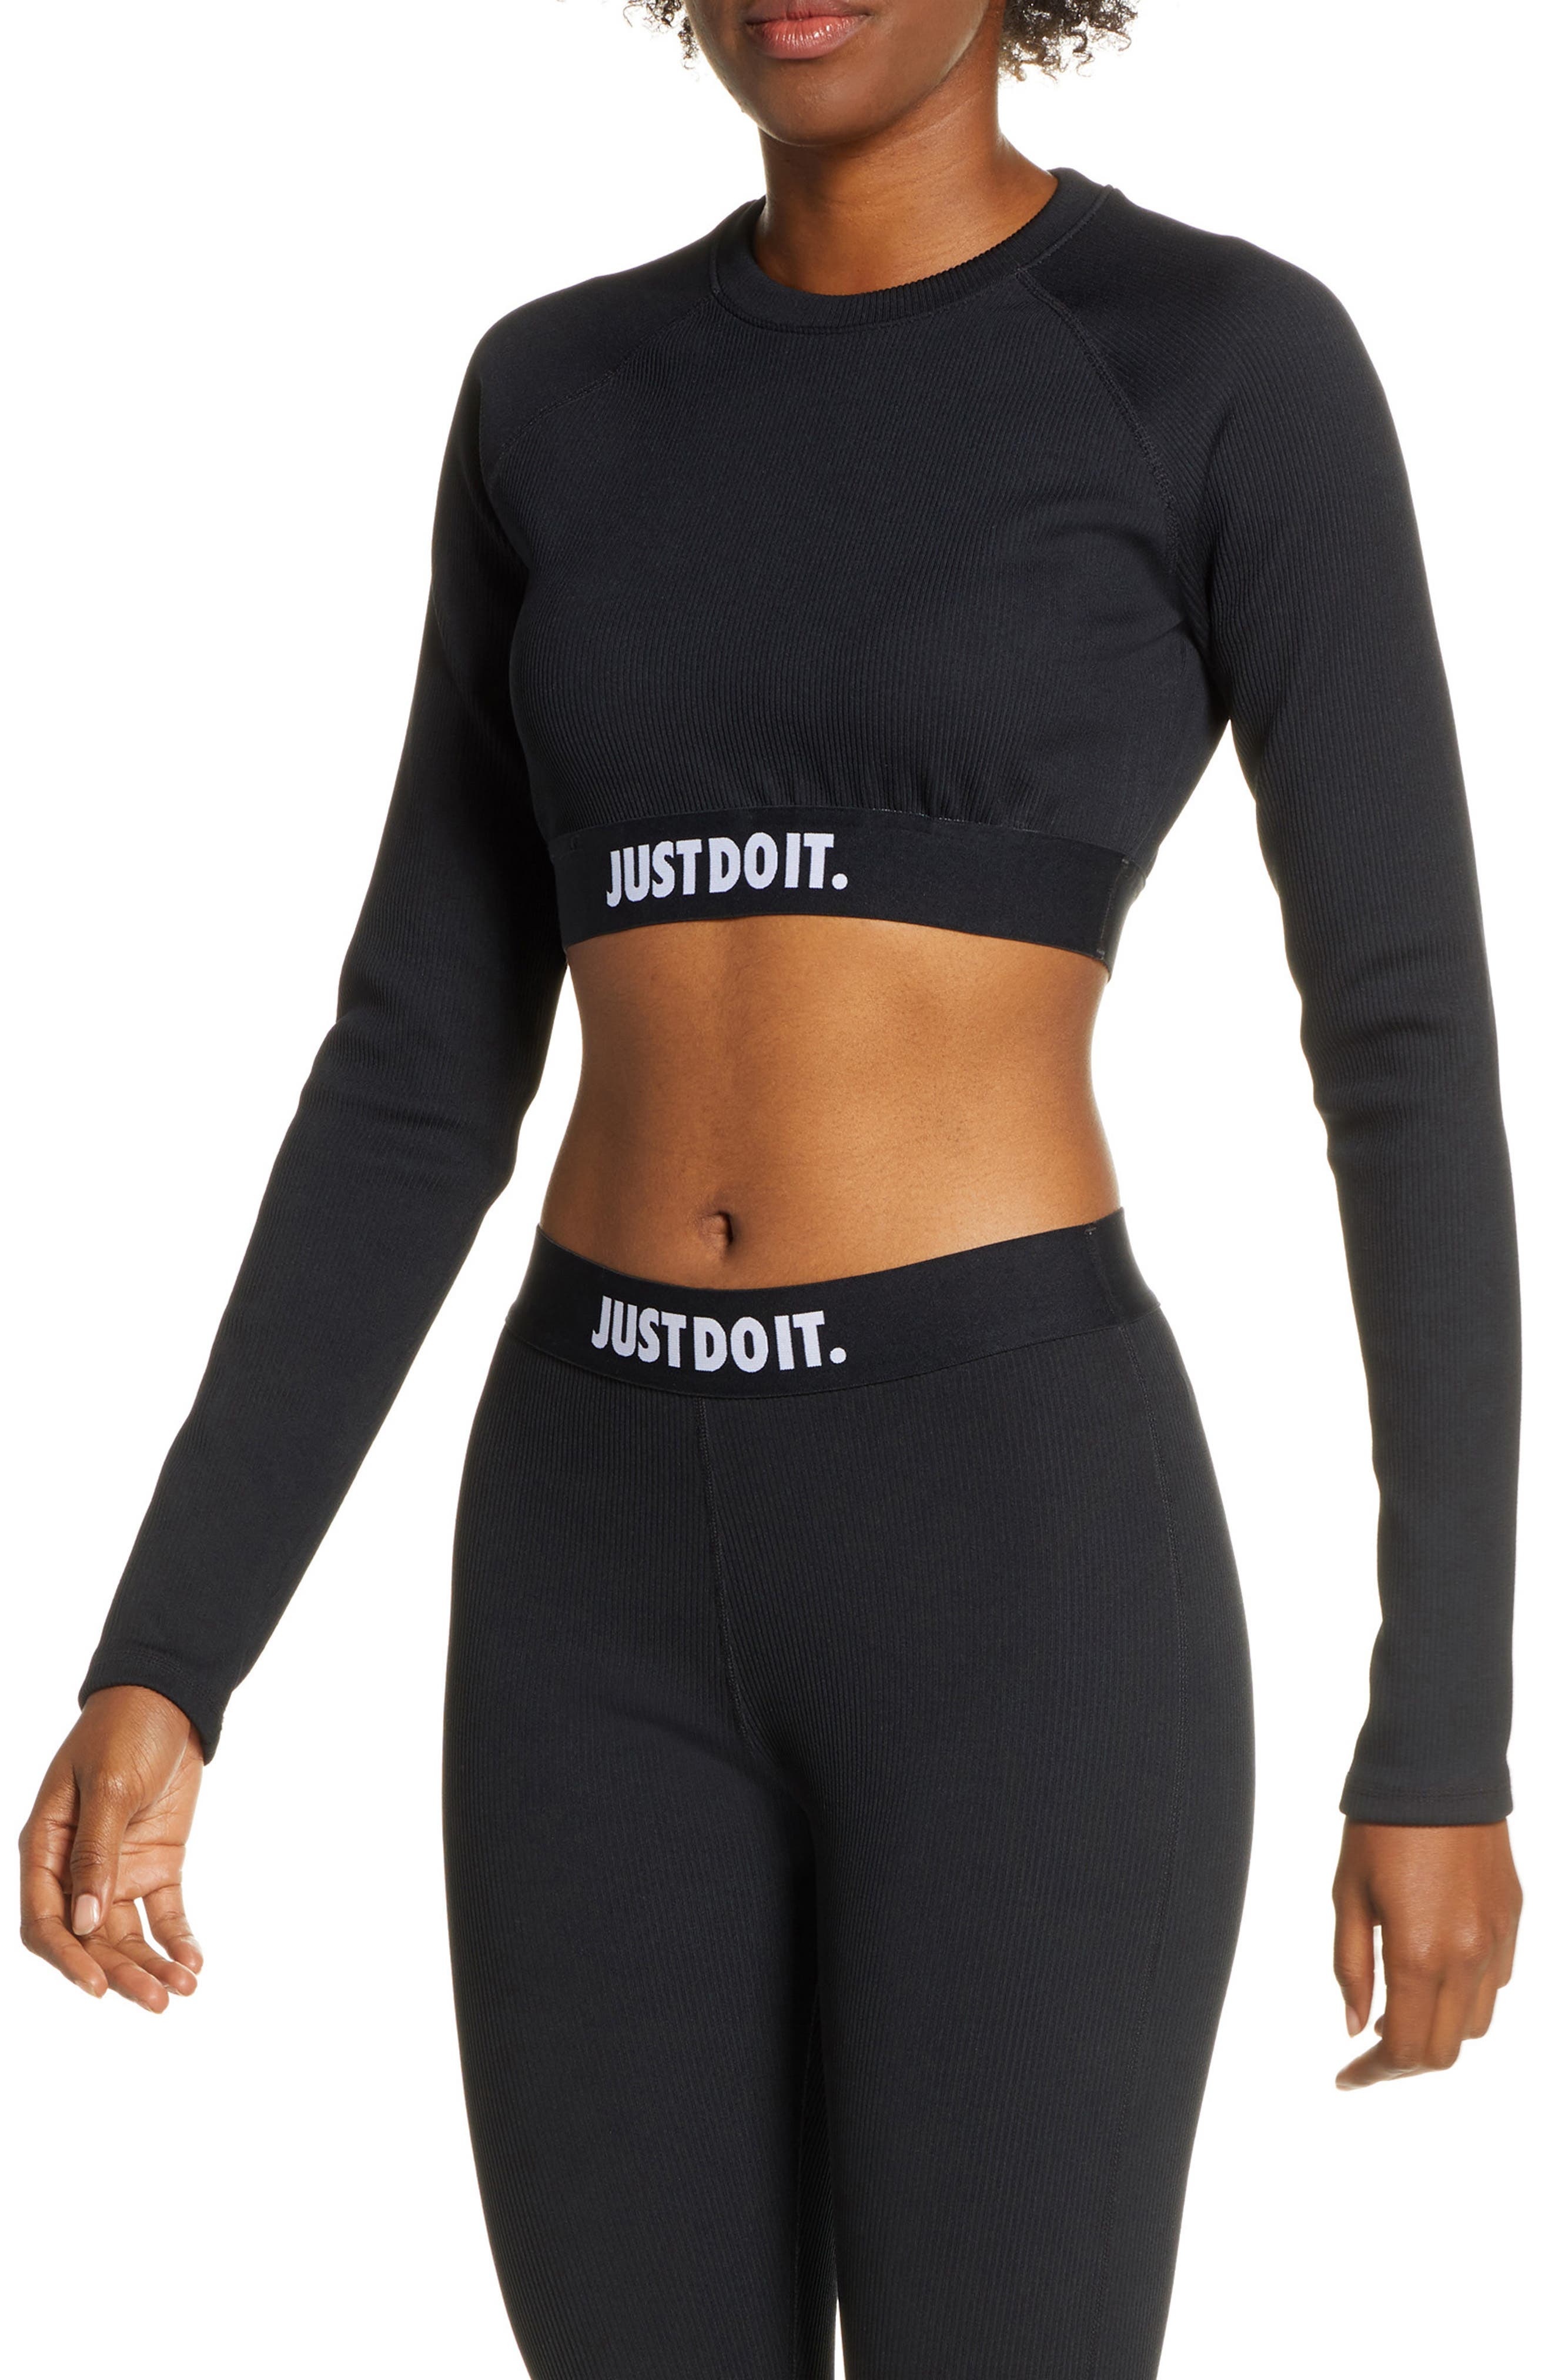 nike just do it crop top